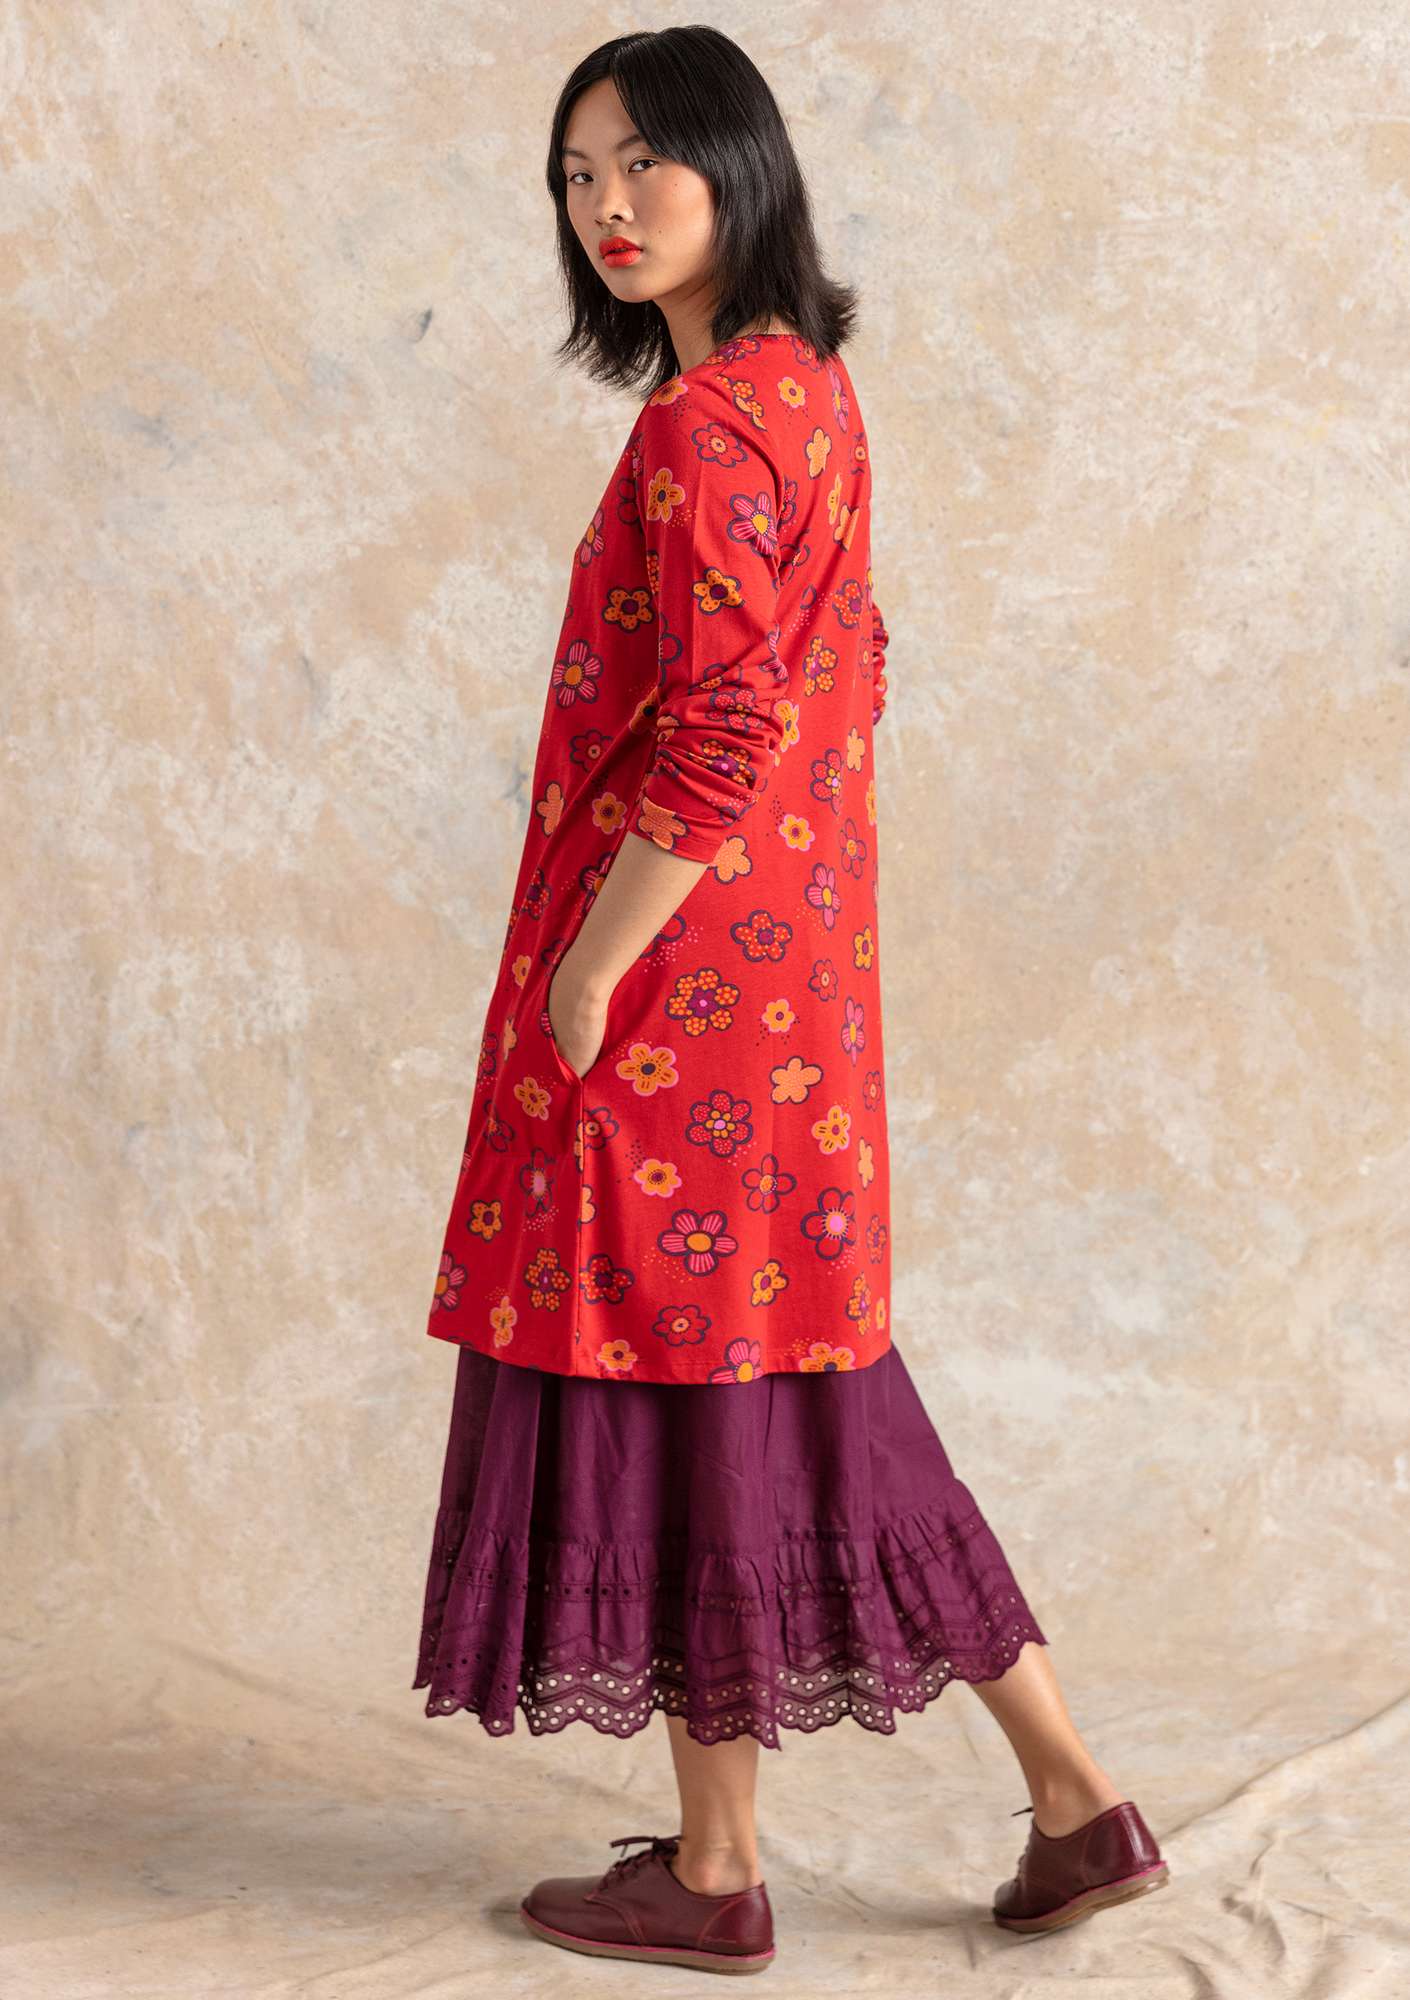 “Aria” jersey tunic in organic cotton/modal parrot red/patterned thumbnail